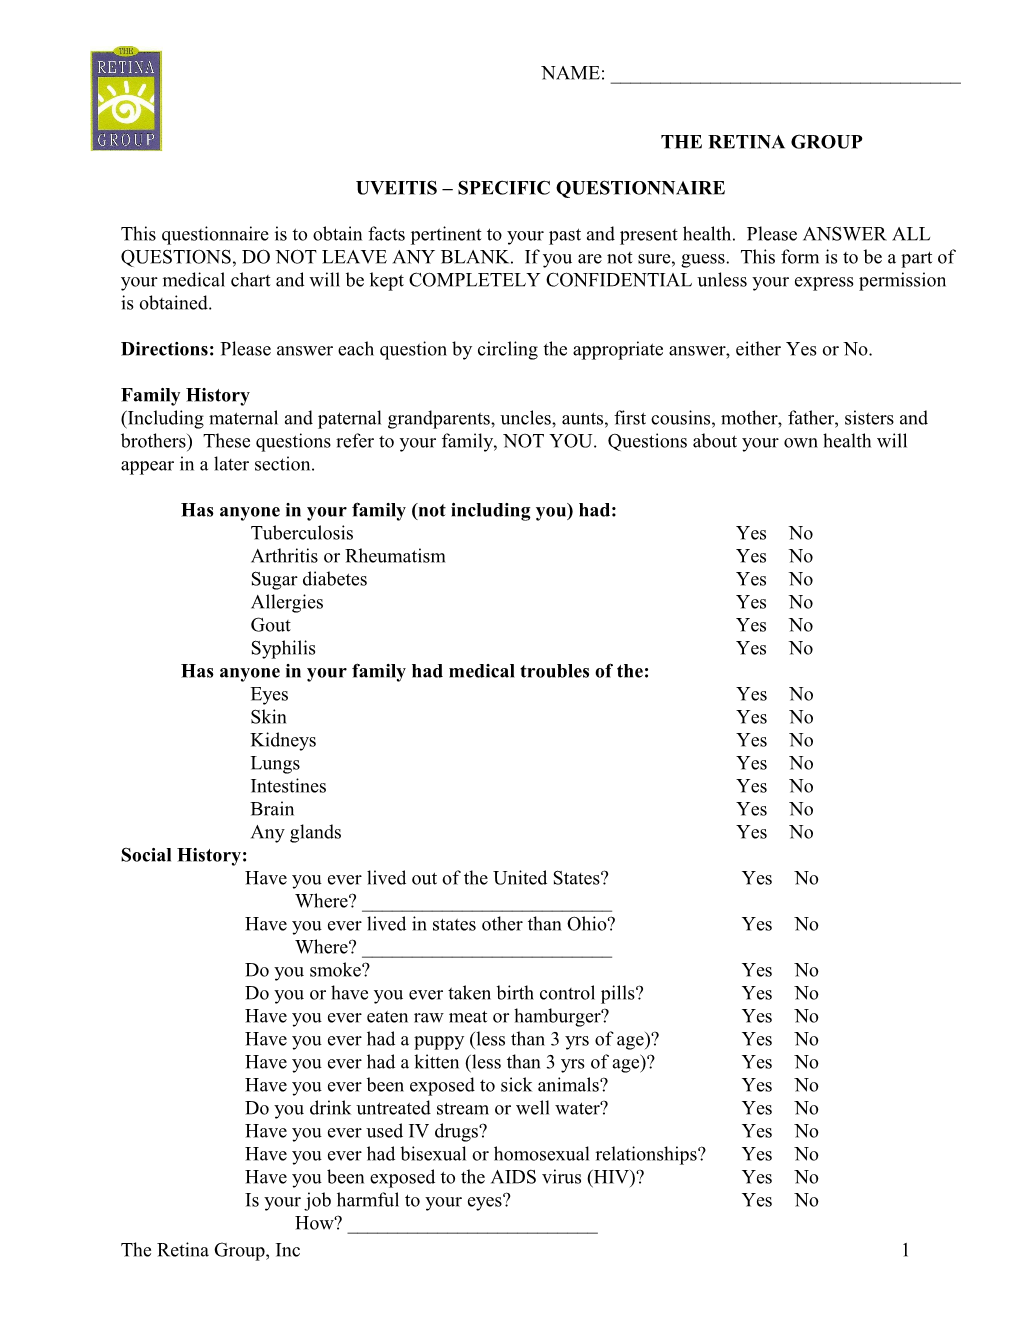 Uveitis Specific Questionnaire